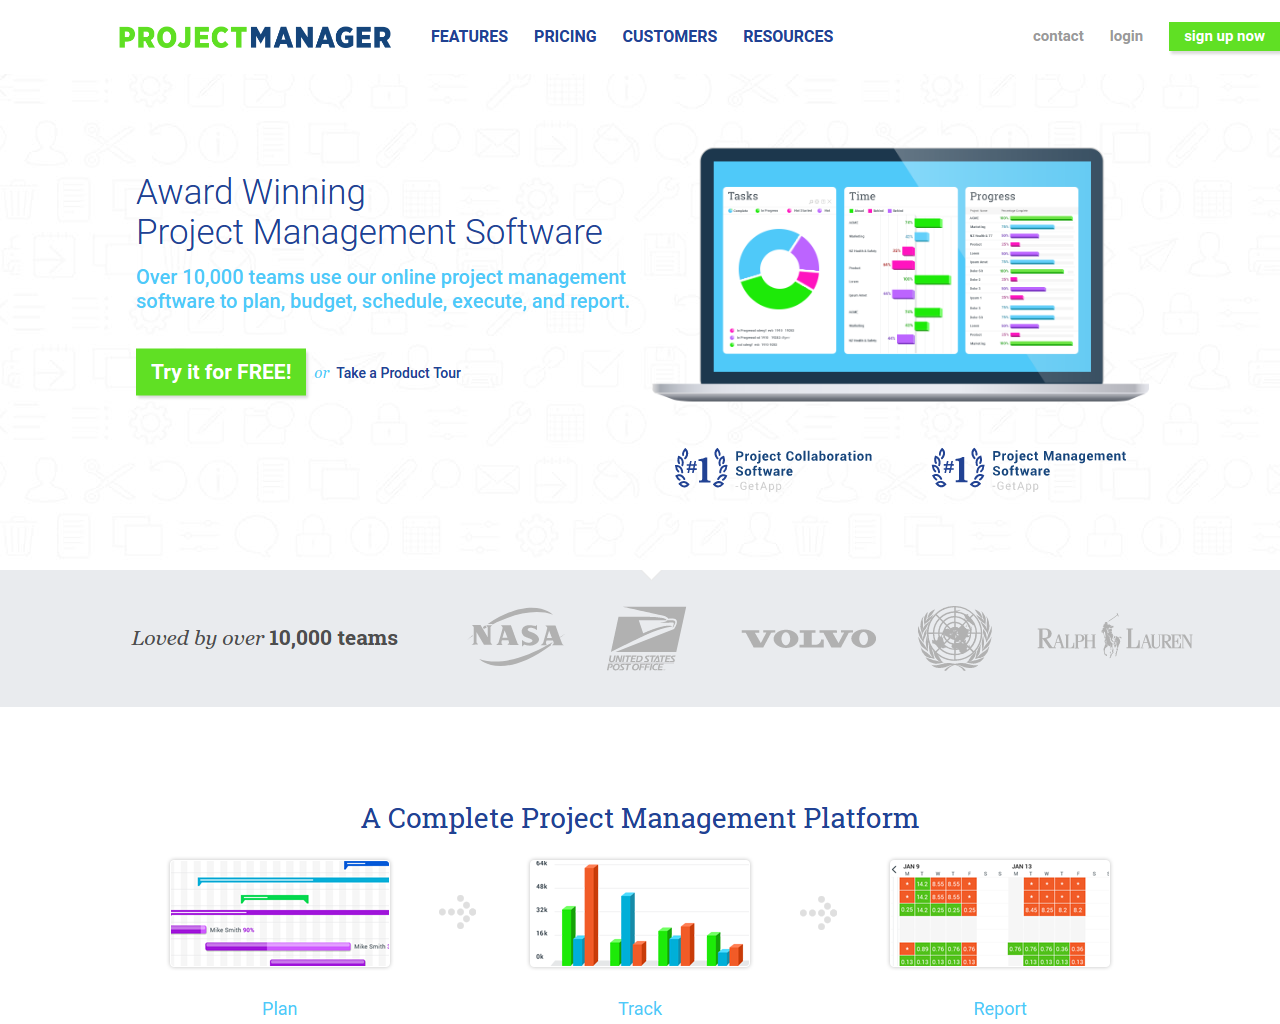 Cover photo of ProjectManager.com